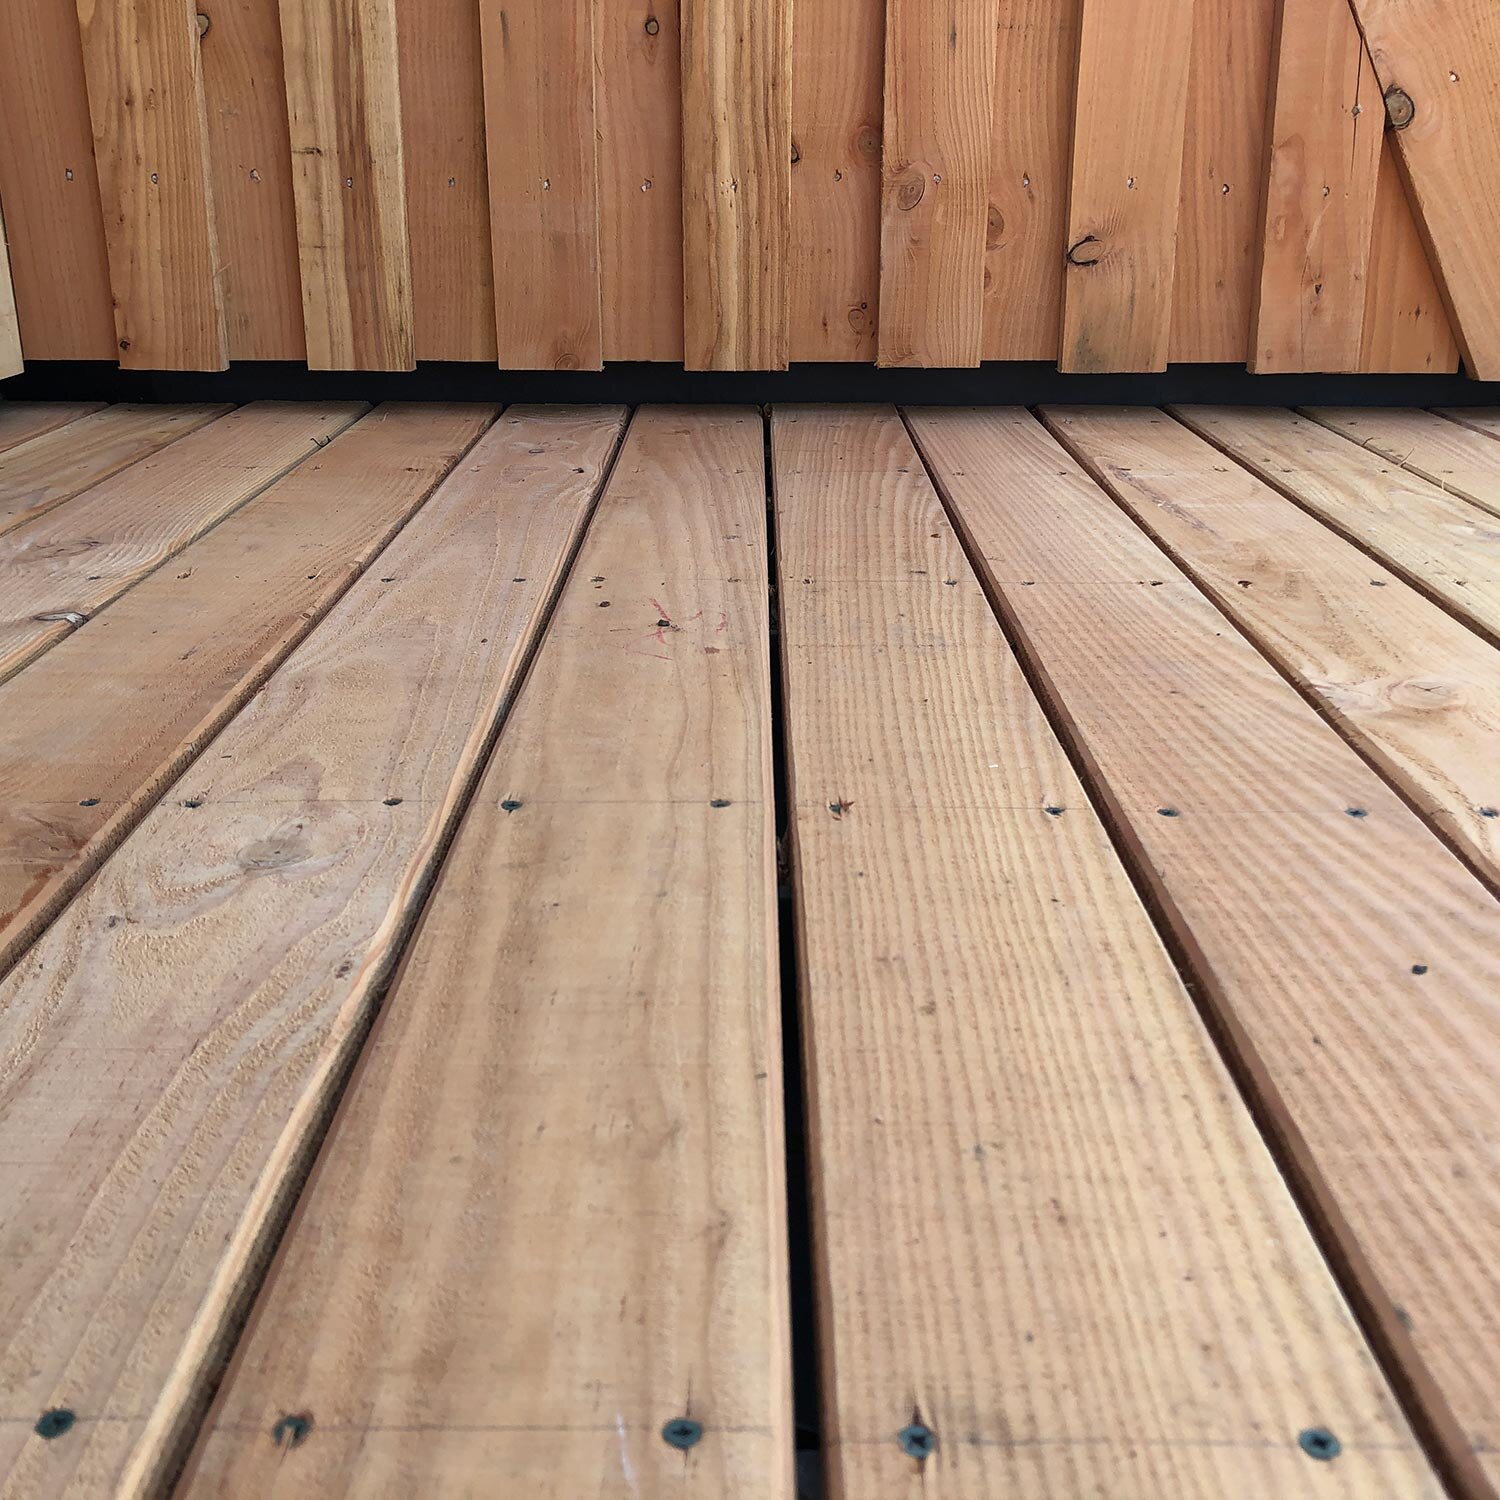 Detail of timber decking and cladding